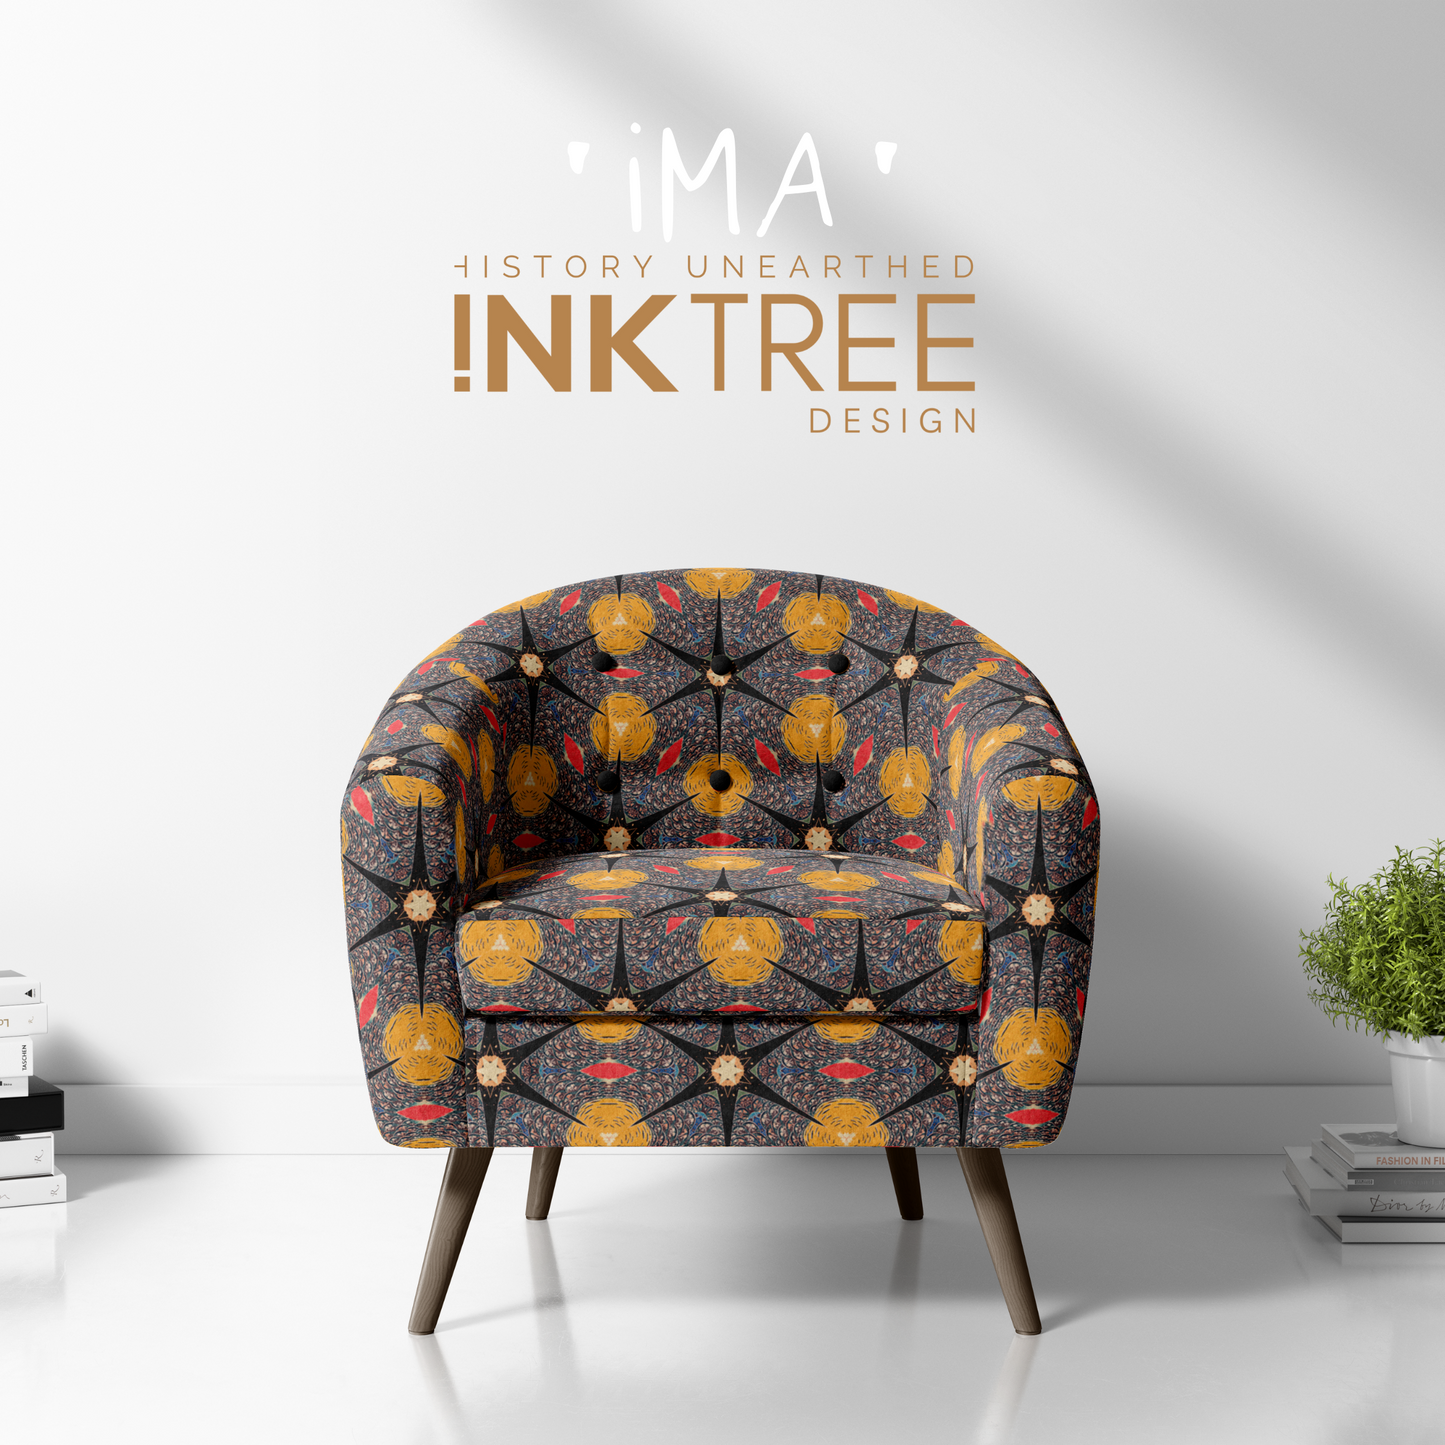 A club chair with a gold, black, blue, red and white oriental looking pattern on it with a white wall background and books and pot plant on the floor.  There is a ima history unearthered ink tree design logo on it.